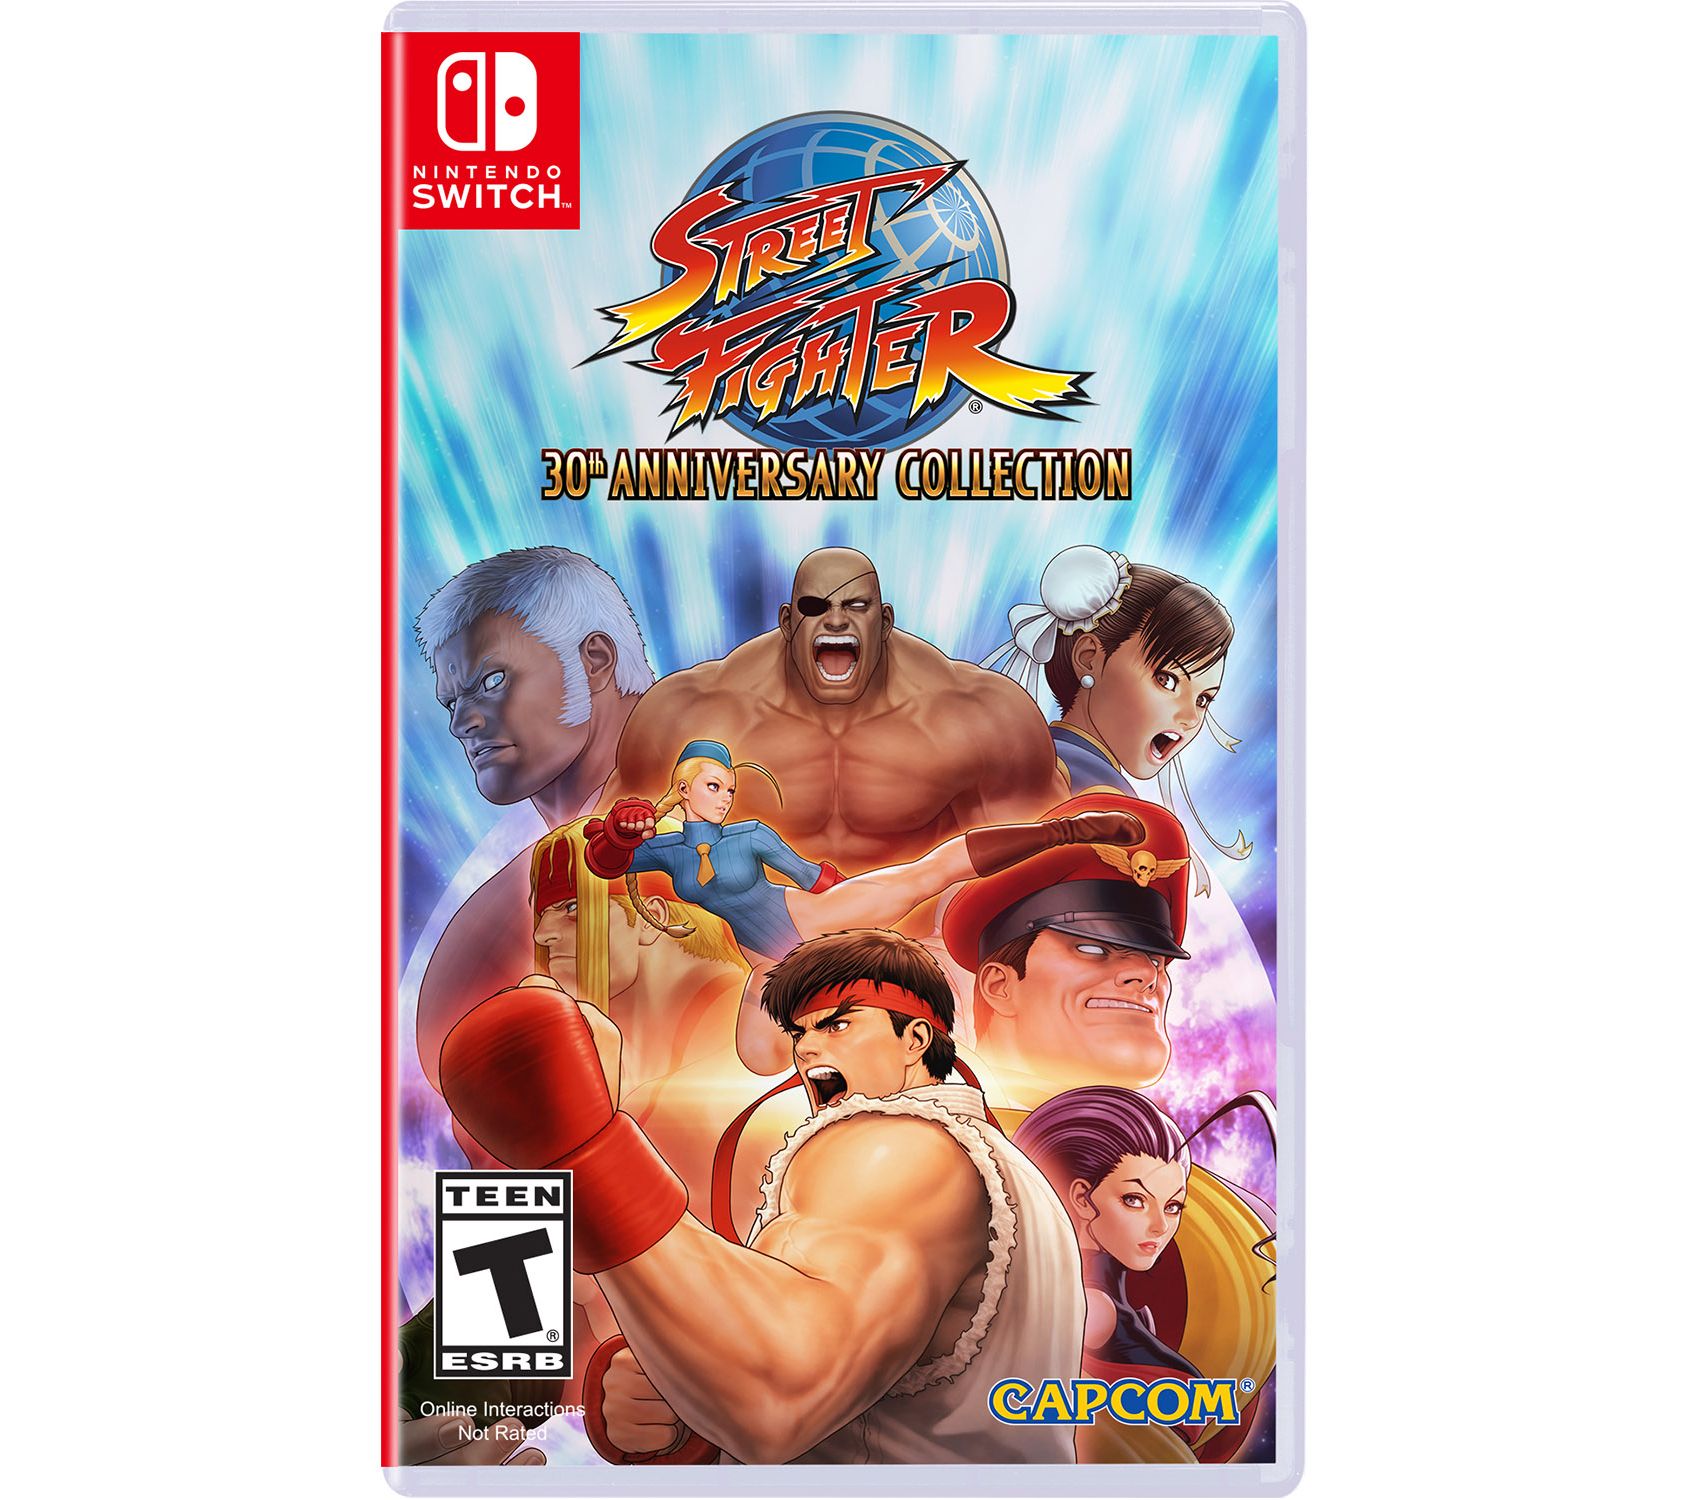 Street Fighter Anniversary Edition Game -Nintendo Switch - QVC.com